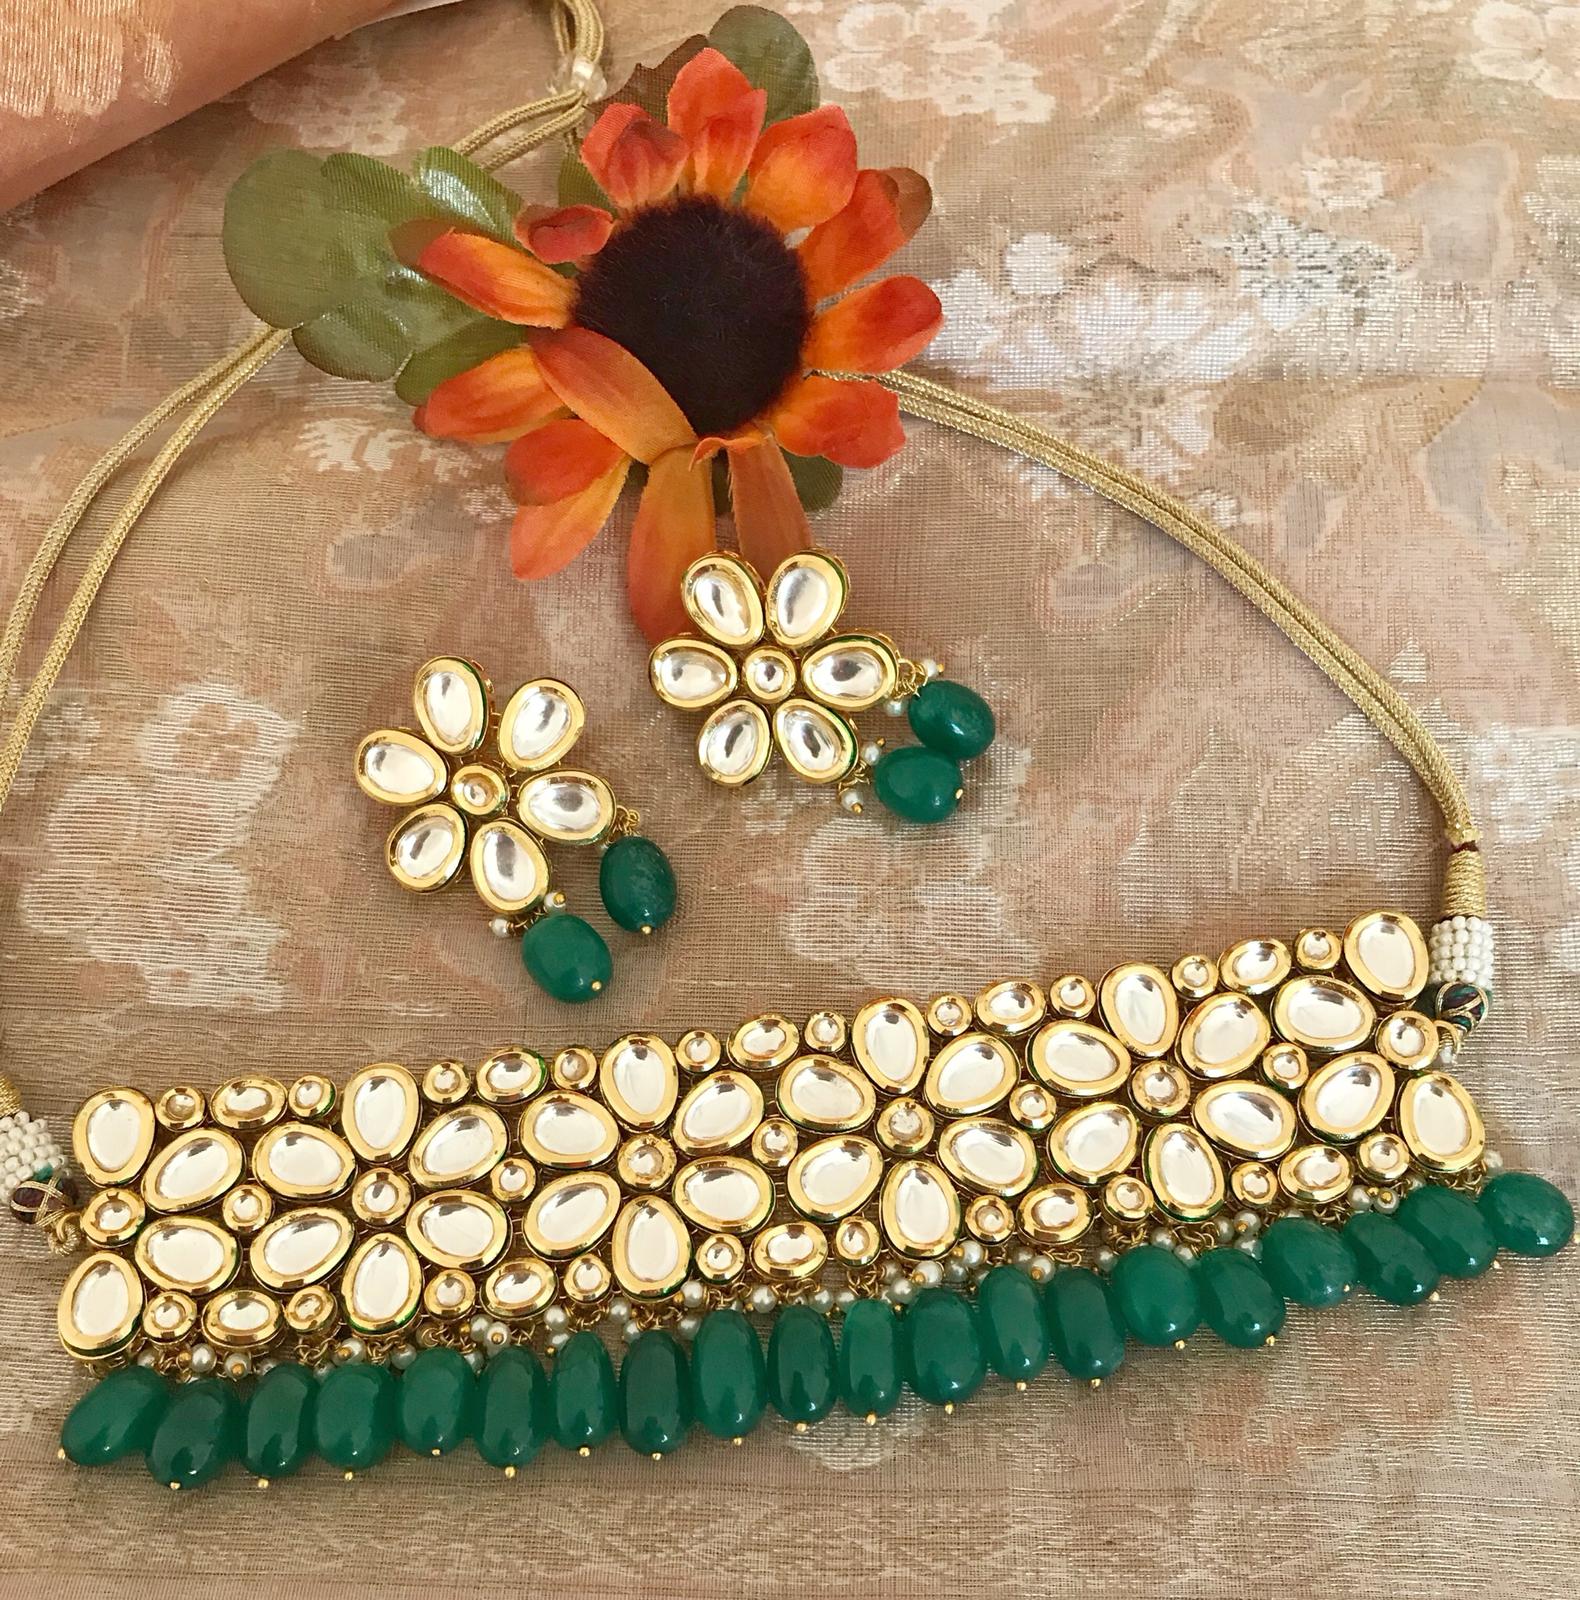 3 Piece with the Finest Quality Kundan Choker Set with Green Beads and Matching Earrings